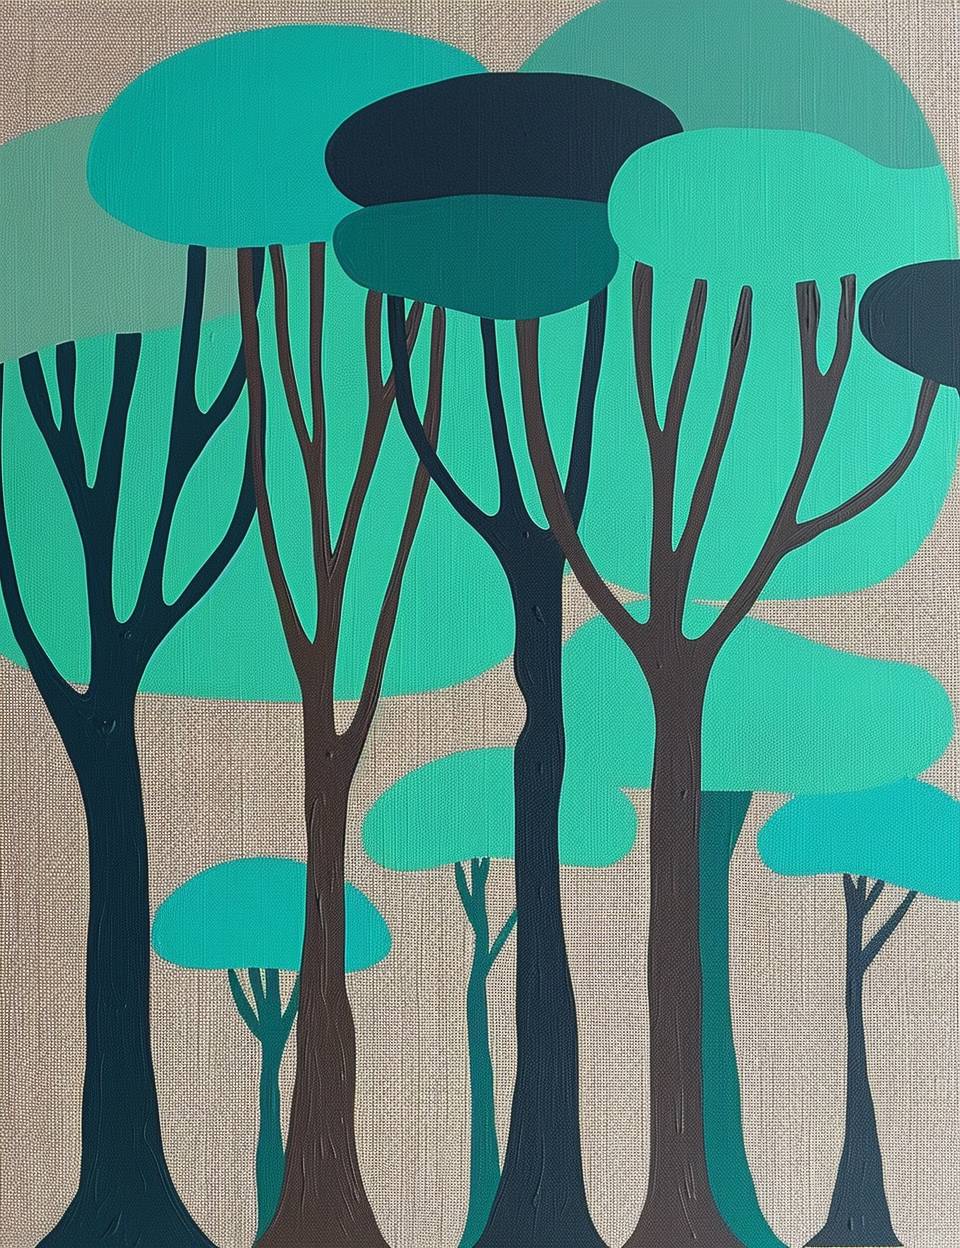 A simple painting of tall trees in the style of mid century modern, with aqua green and brown tones, simple shapes, on a burlap background.